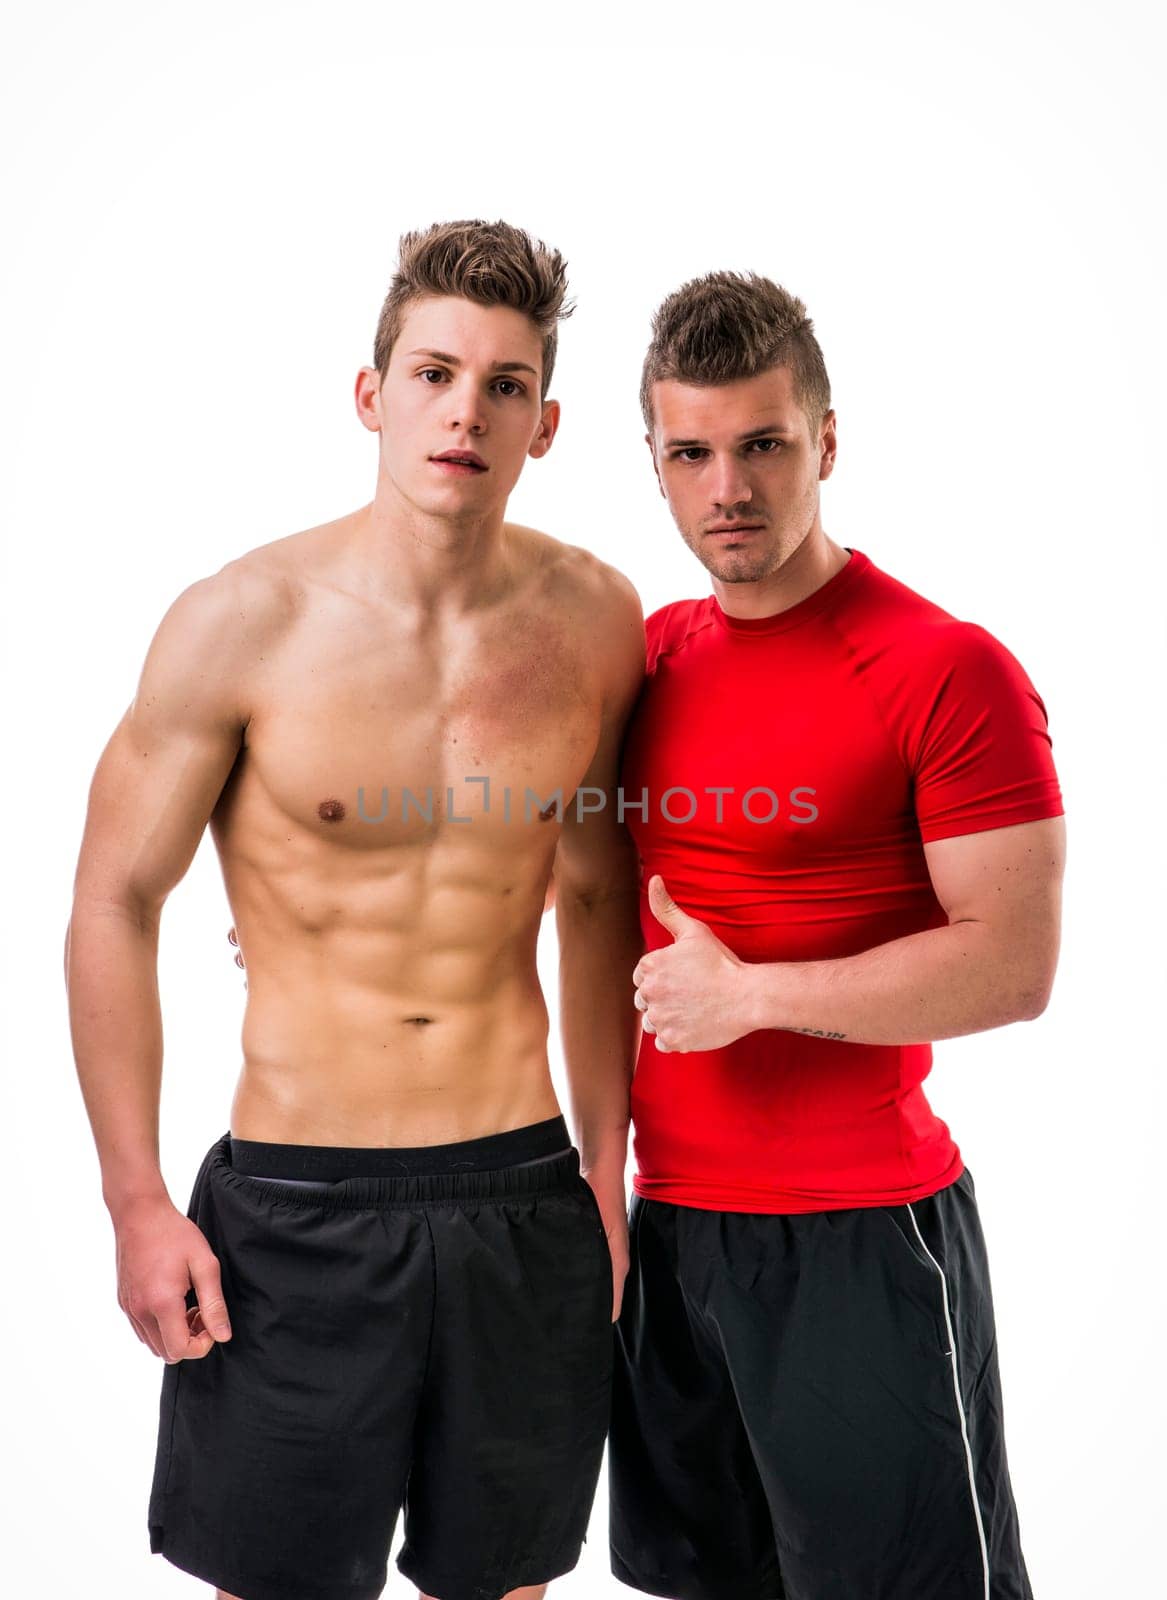 Photo of two young men posing together by artofphoto